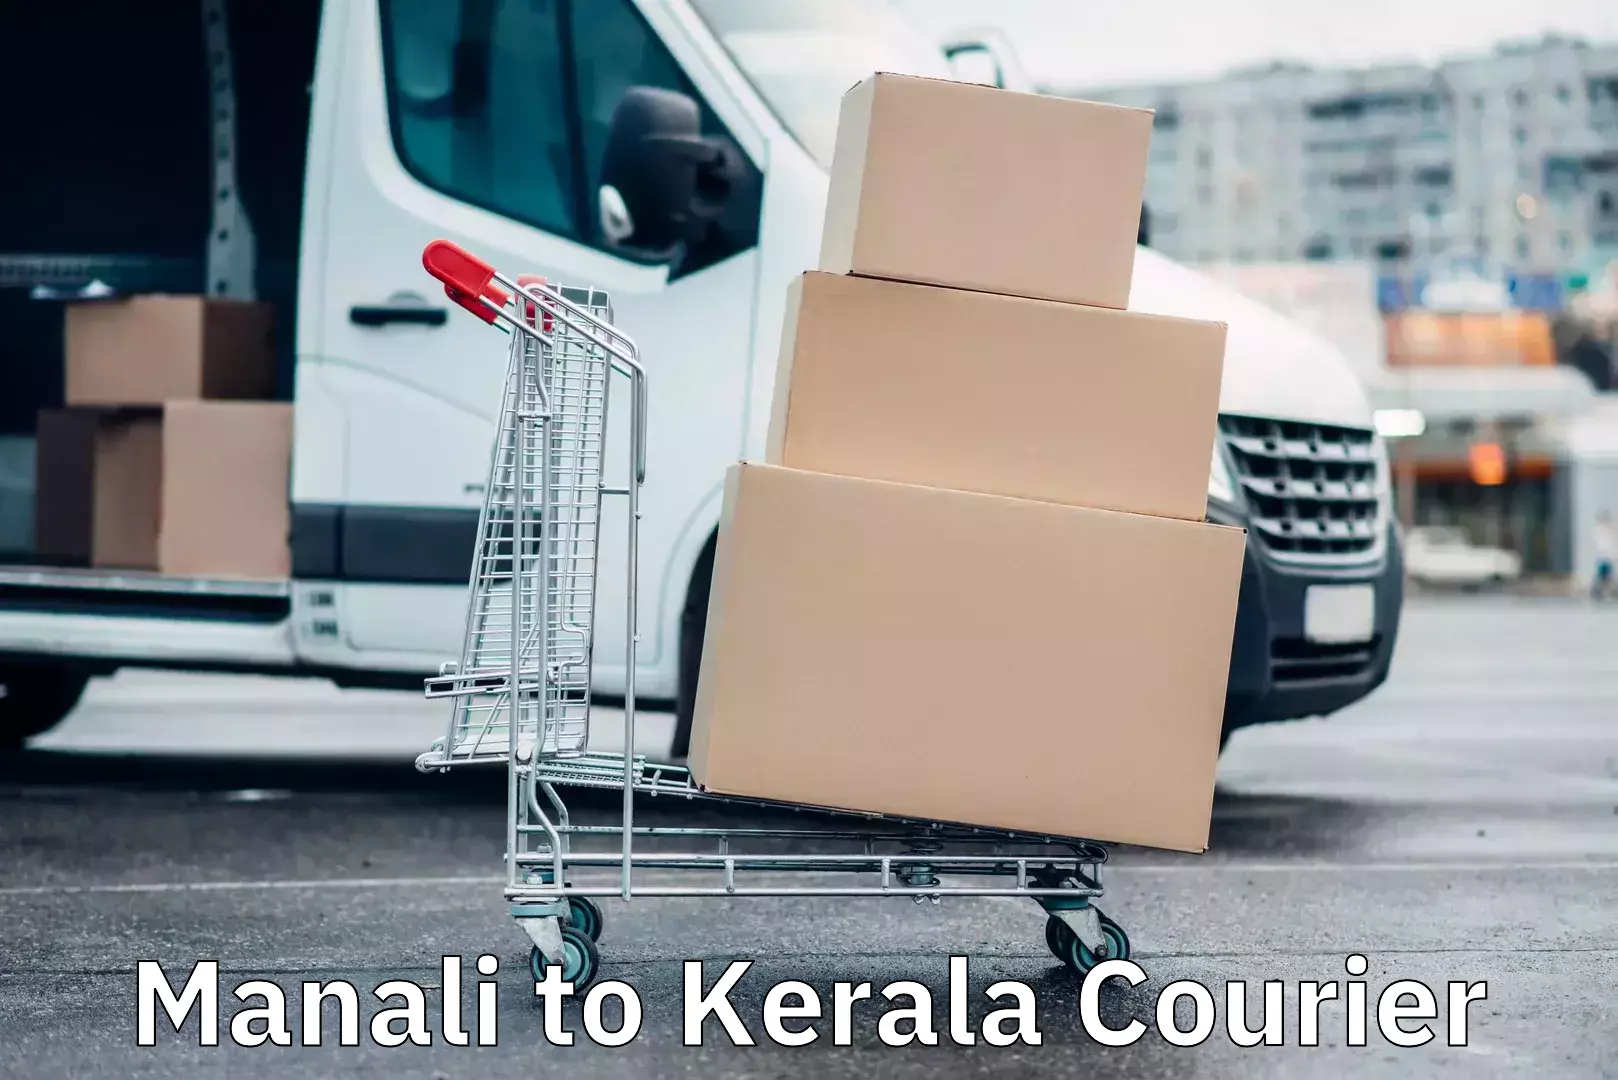 Flexible delivery scheduling in Manali to Kerala